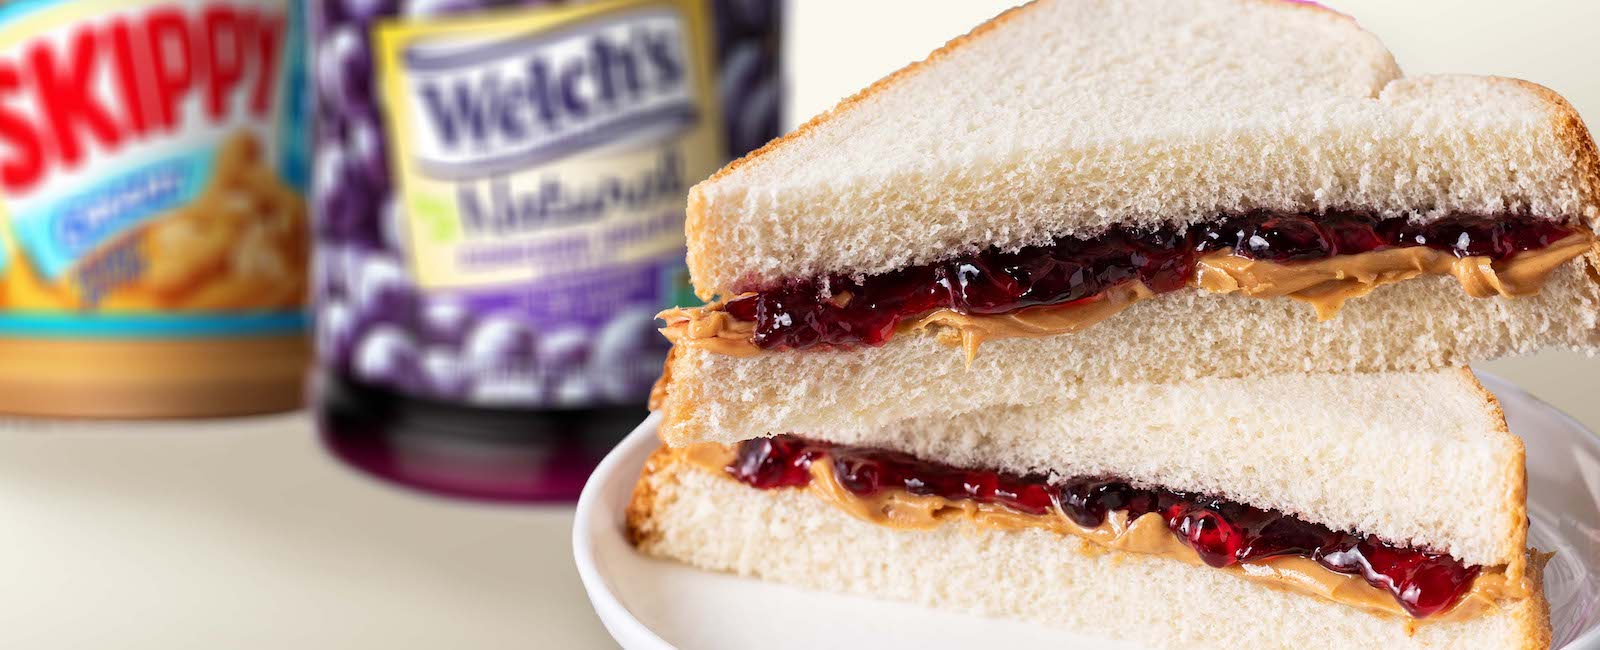 Classic Peanut Butter and Jelly Sandwich